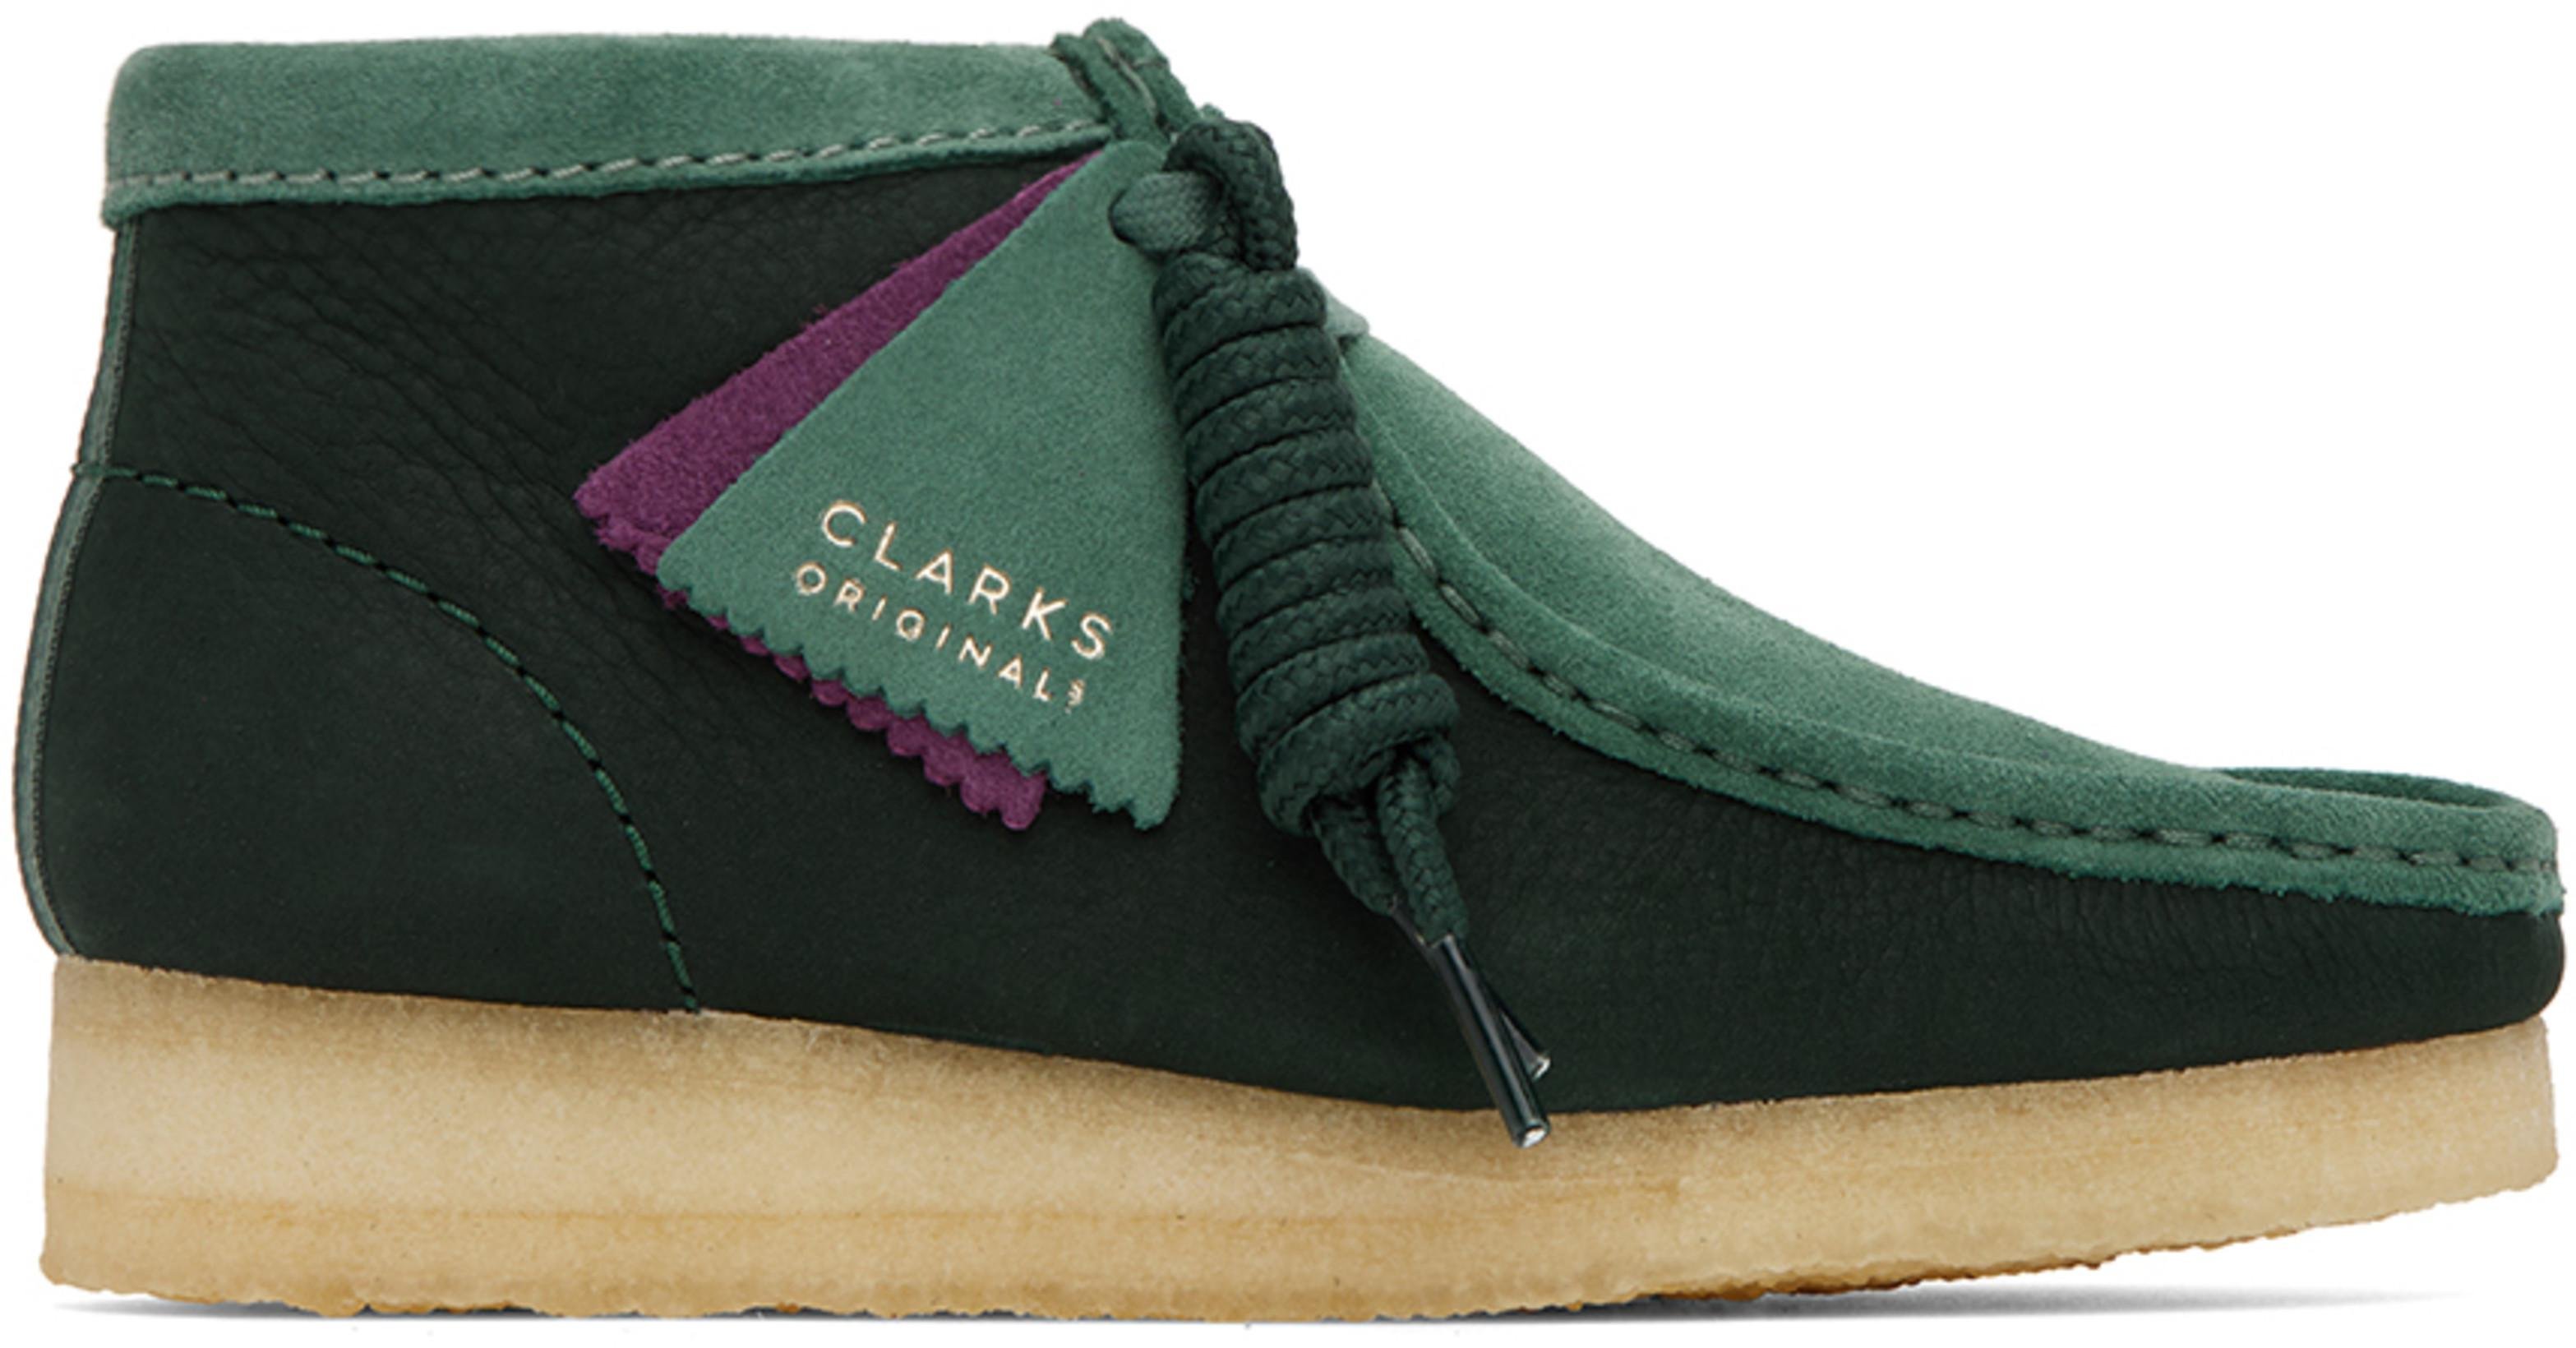 Blue Wallabee Boots by CLARKS ORIGINALS